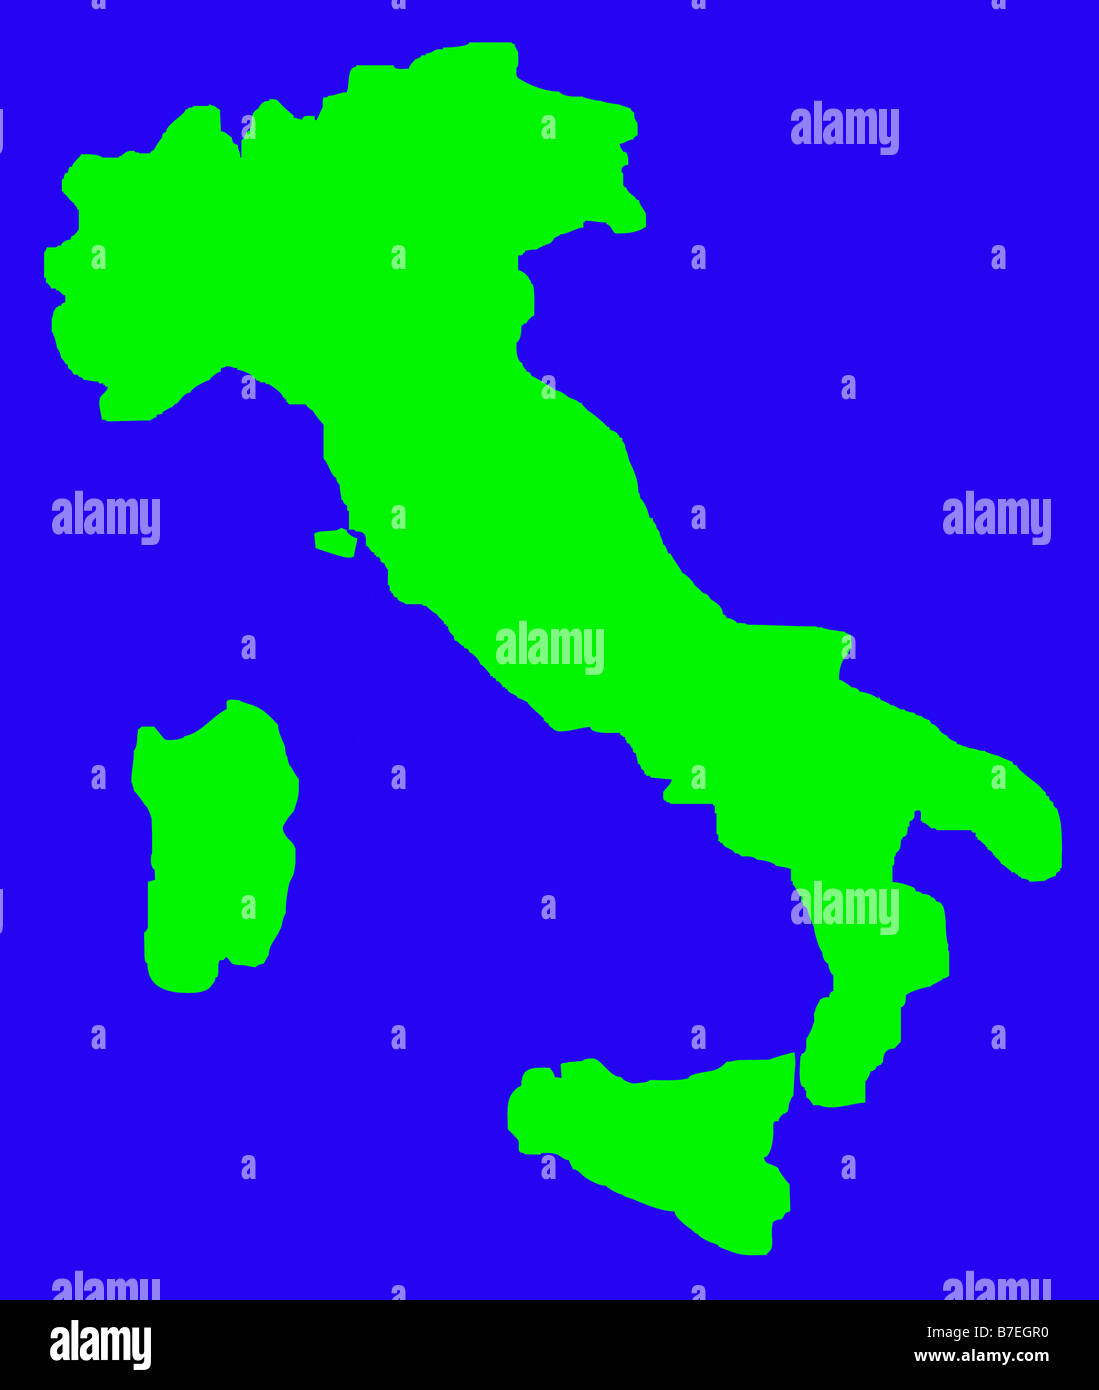 Outline map of Italy in green isolated on blue background Stock Photo